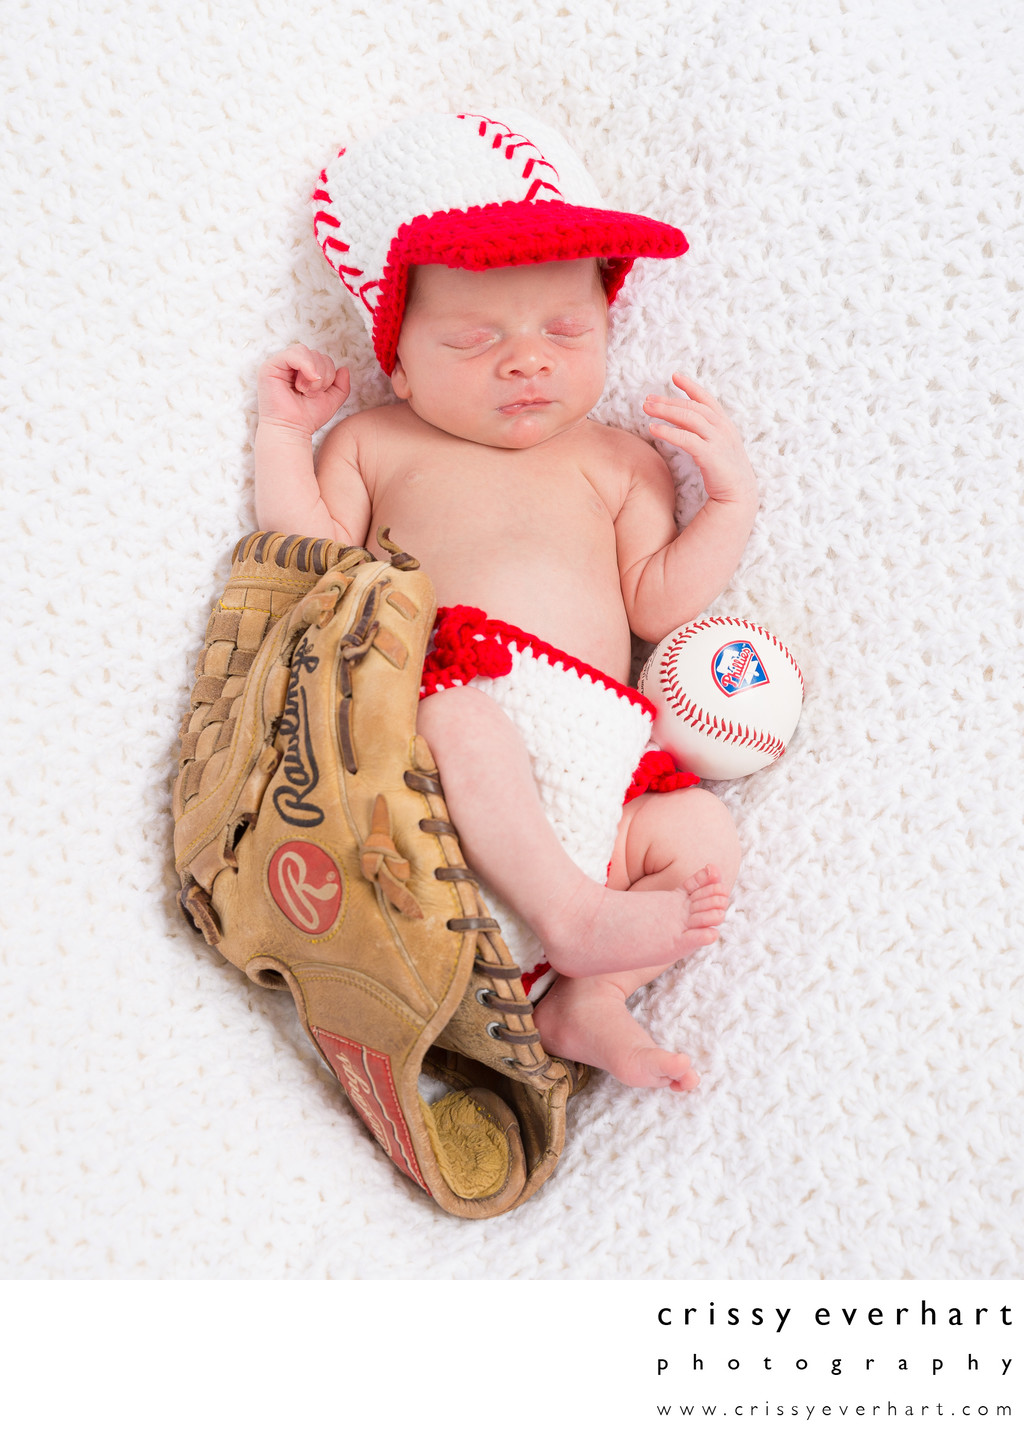 Baby in Knit Phillies Outfit with Baseball and Glove